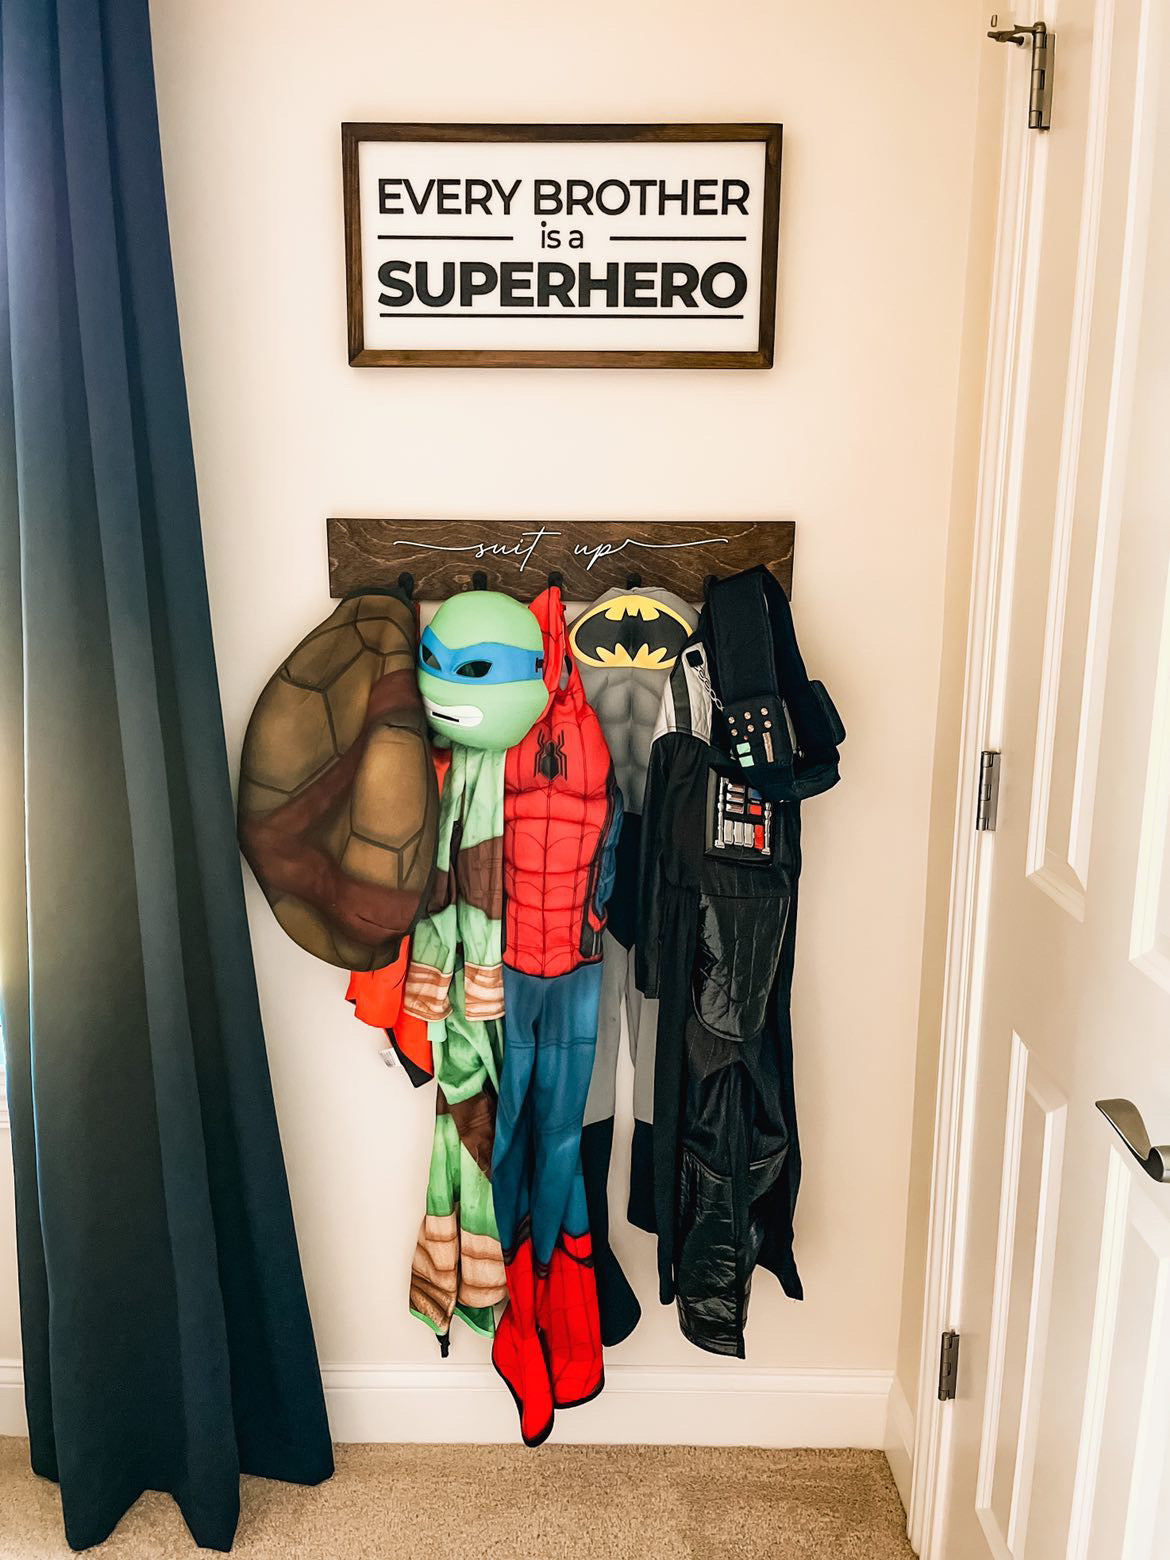 Every Brother is a Superhero | 11x21 inch Wood Sign